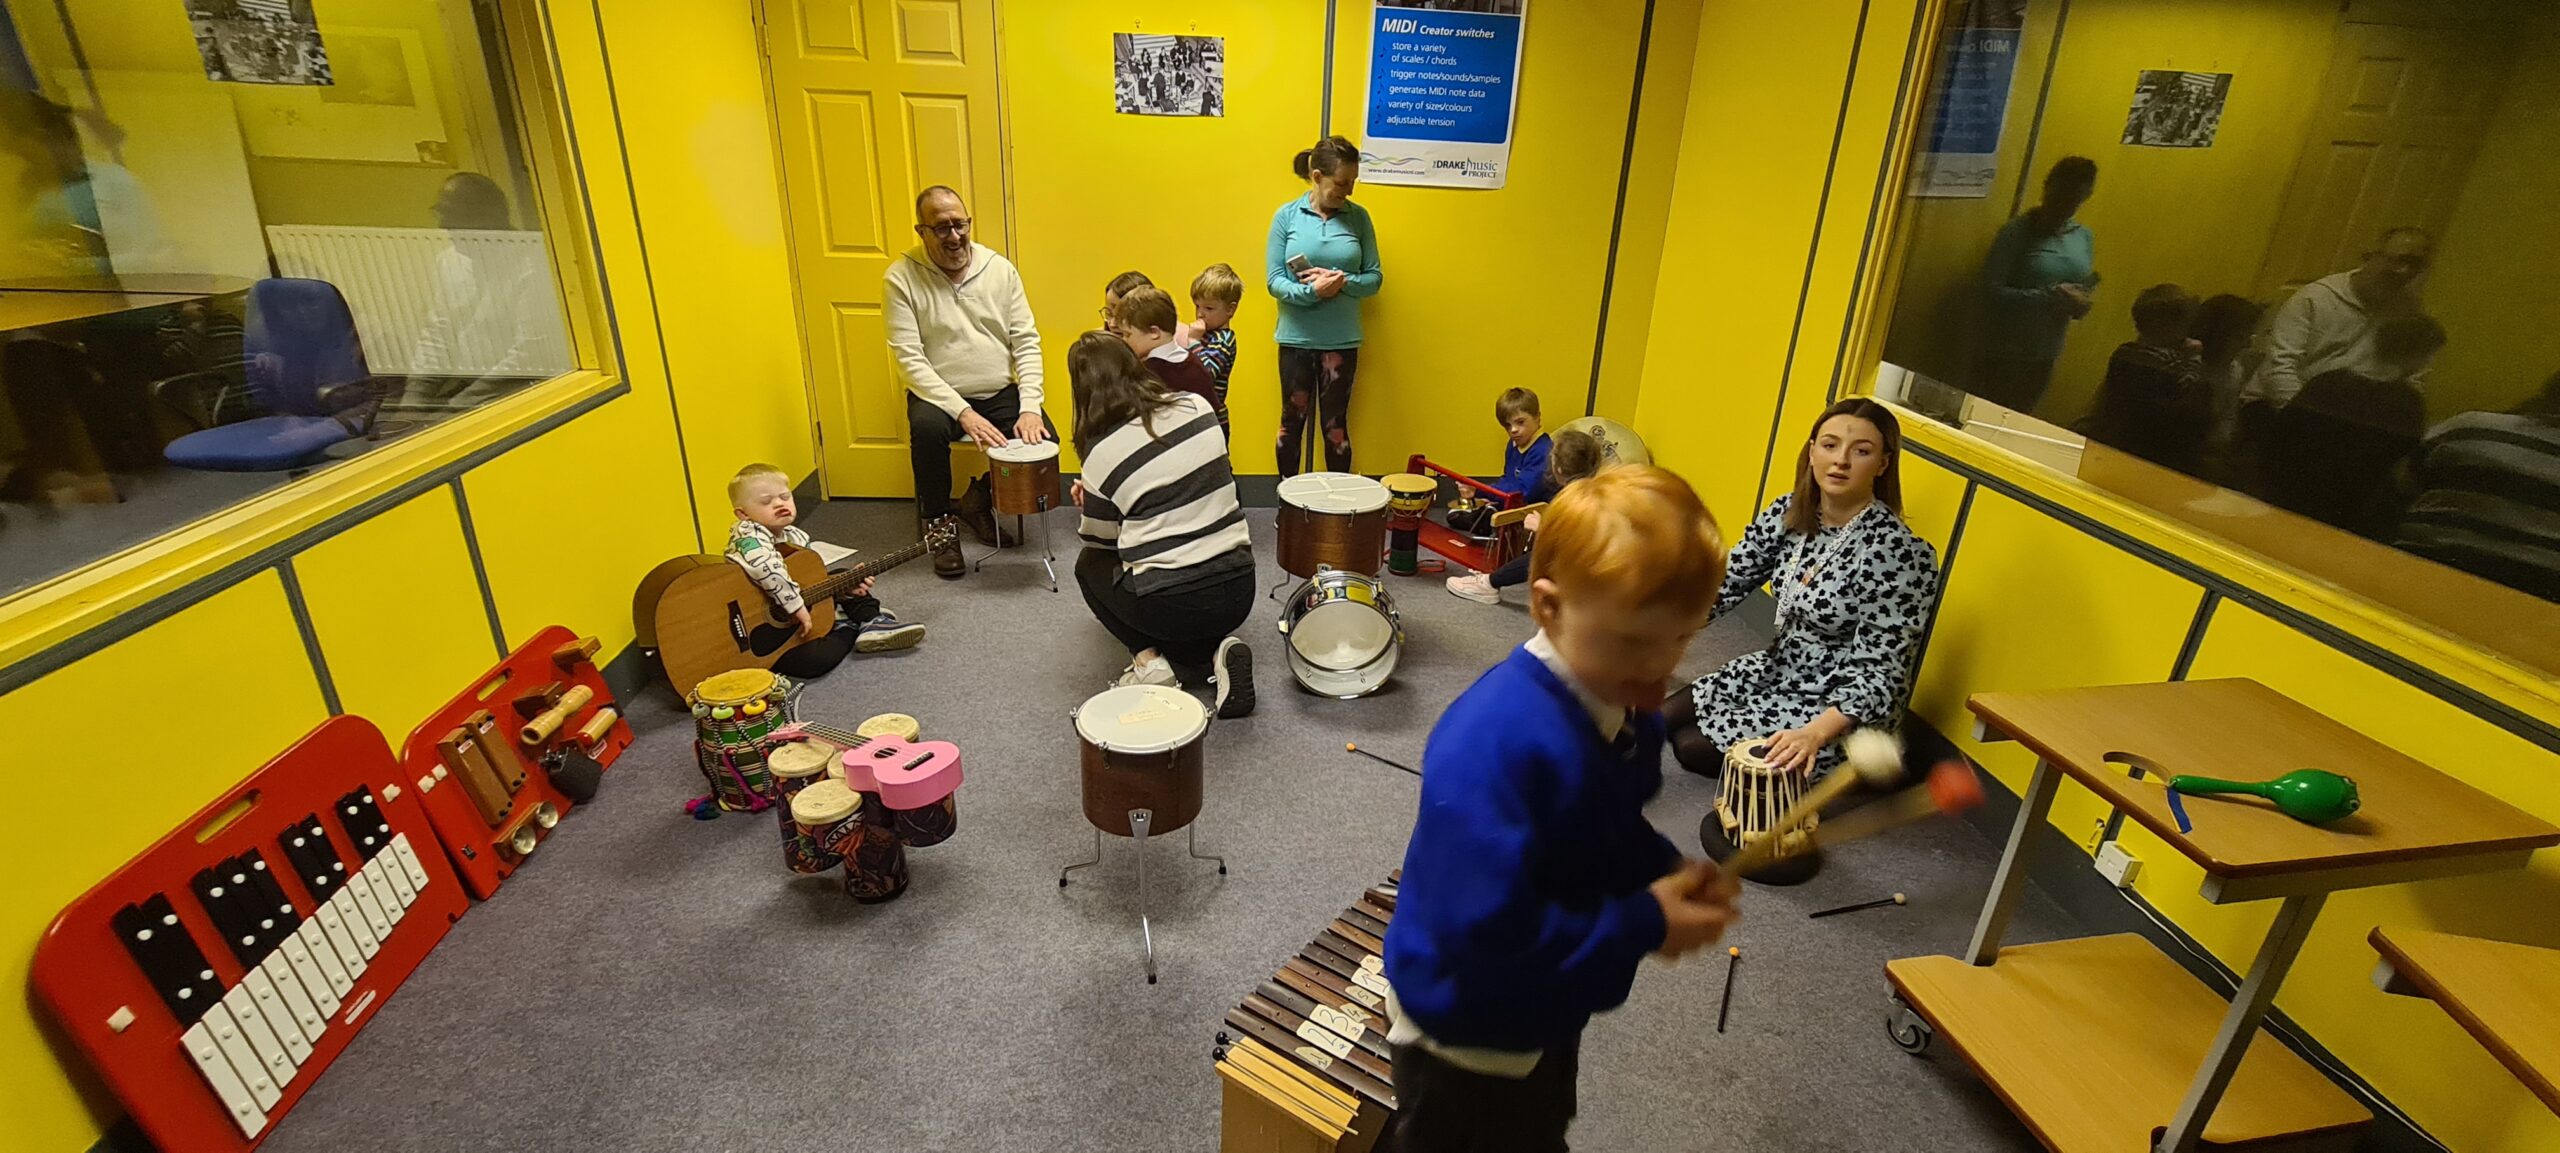 Tutor Nikos, siting down, plays a small drum with a group of 6 children, who also play different intruments, such as guitar and percussion intruments. They accompained by 3 ladies who also assist the children. during a the Down Right music session at Drake's studio in Newry.